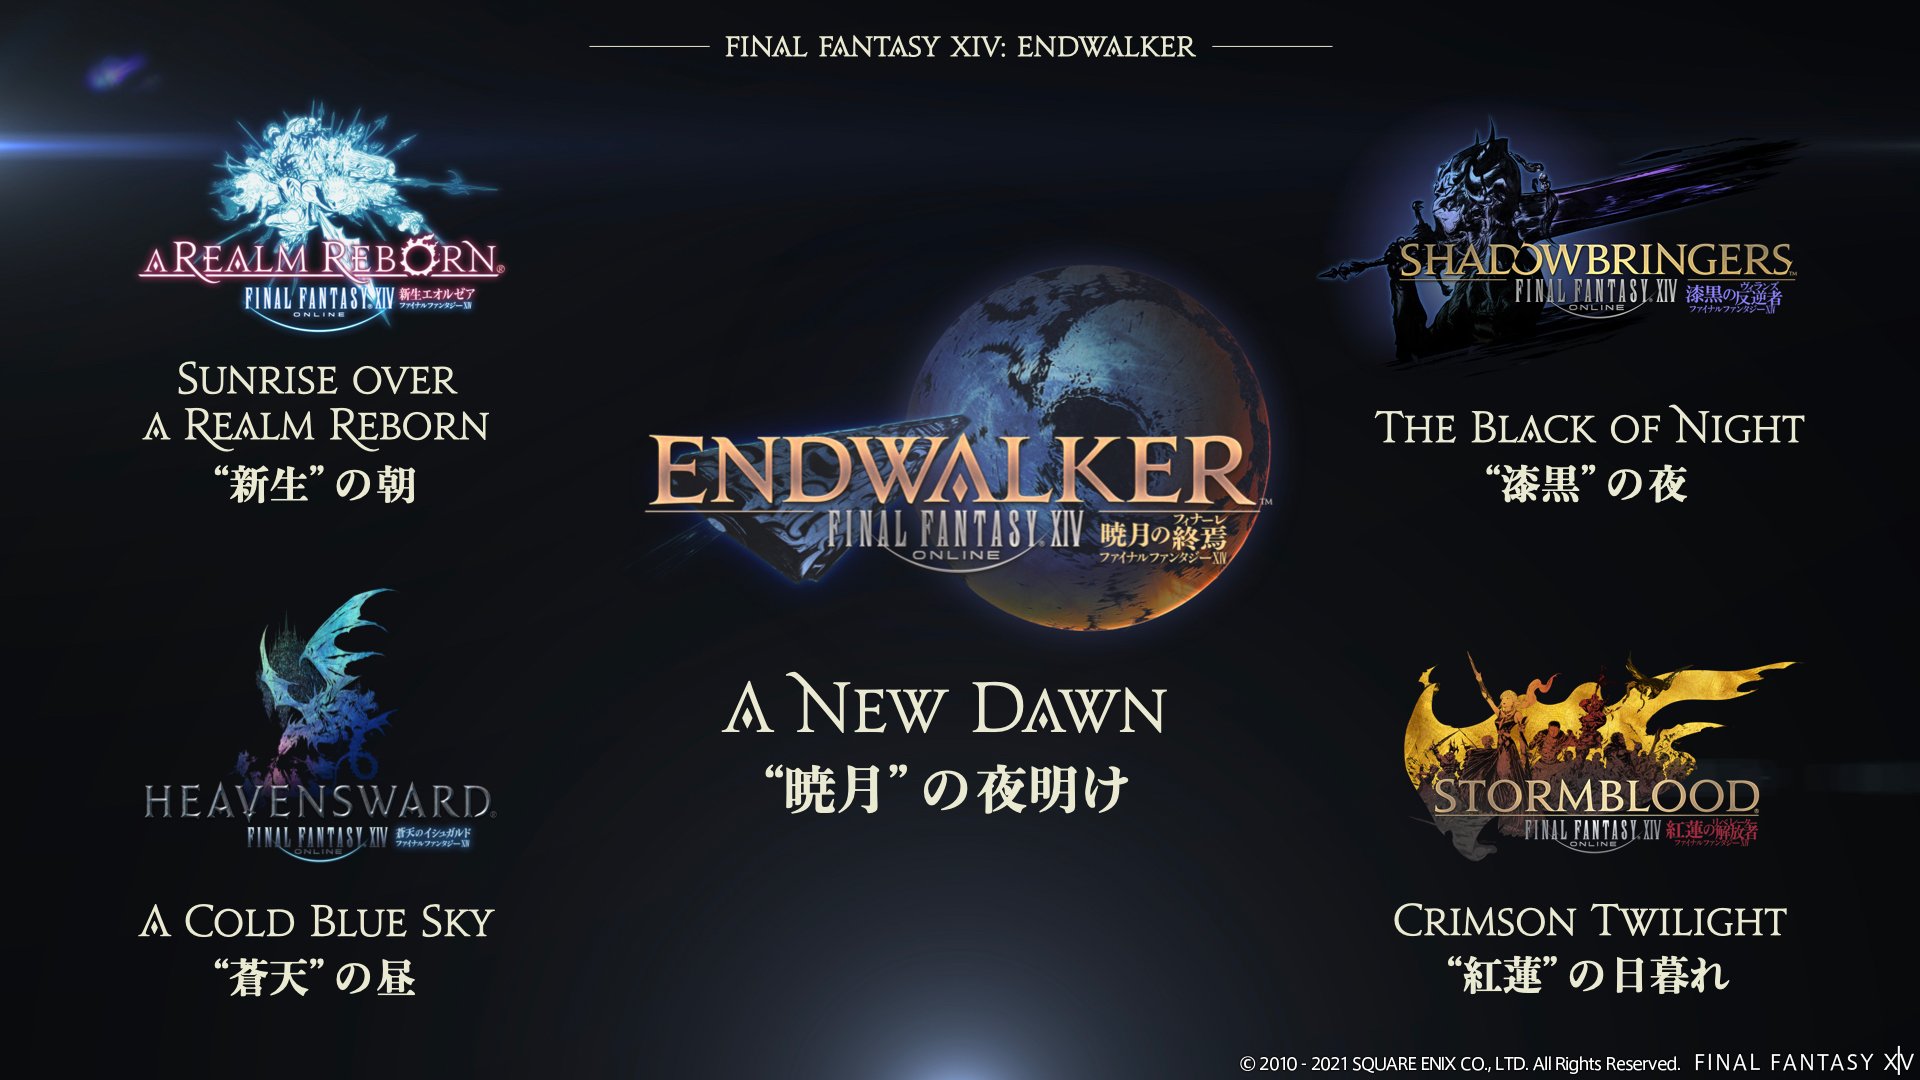 FINAL FANTASY XIV tale of Hydaelyn and Zodiark that began in A Realm Reborn will reach its conclusion in #Endwalker! Don't worry, our adventures in #FFXIV are far from